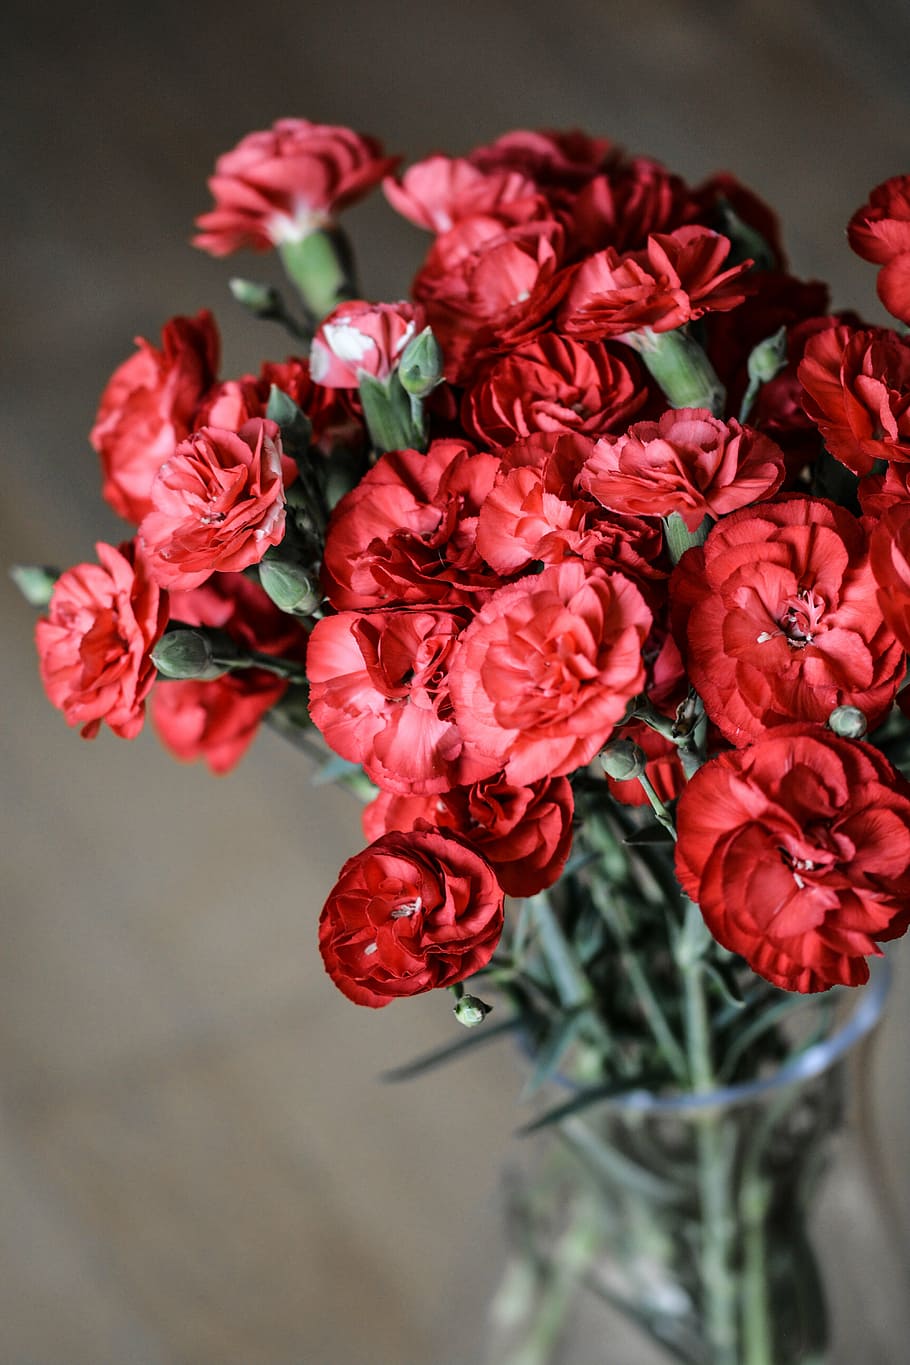 red, petaled flower, clear, glass base, carnation, flowers, nature, bloom, bouquet, smooth